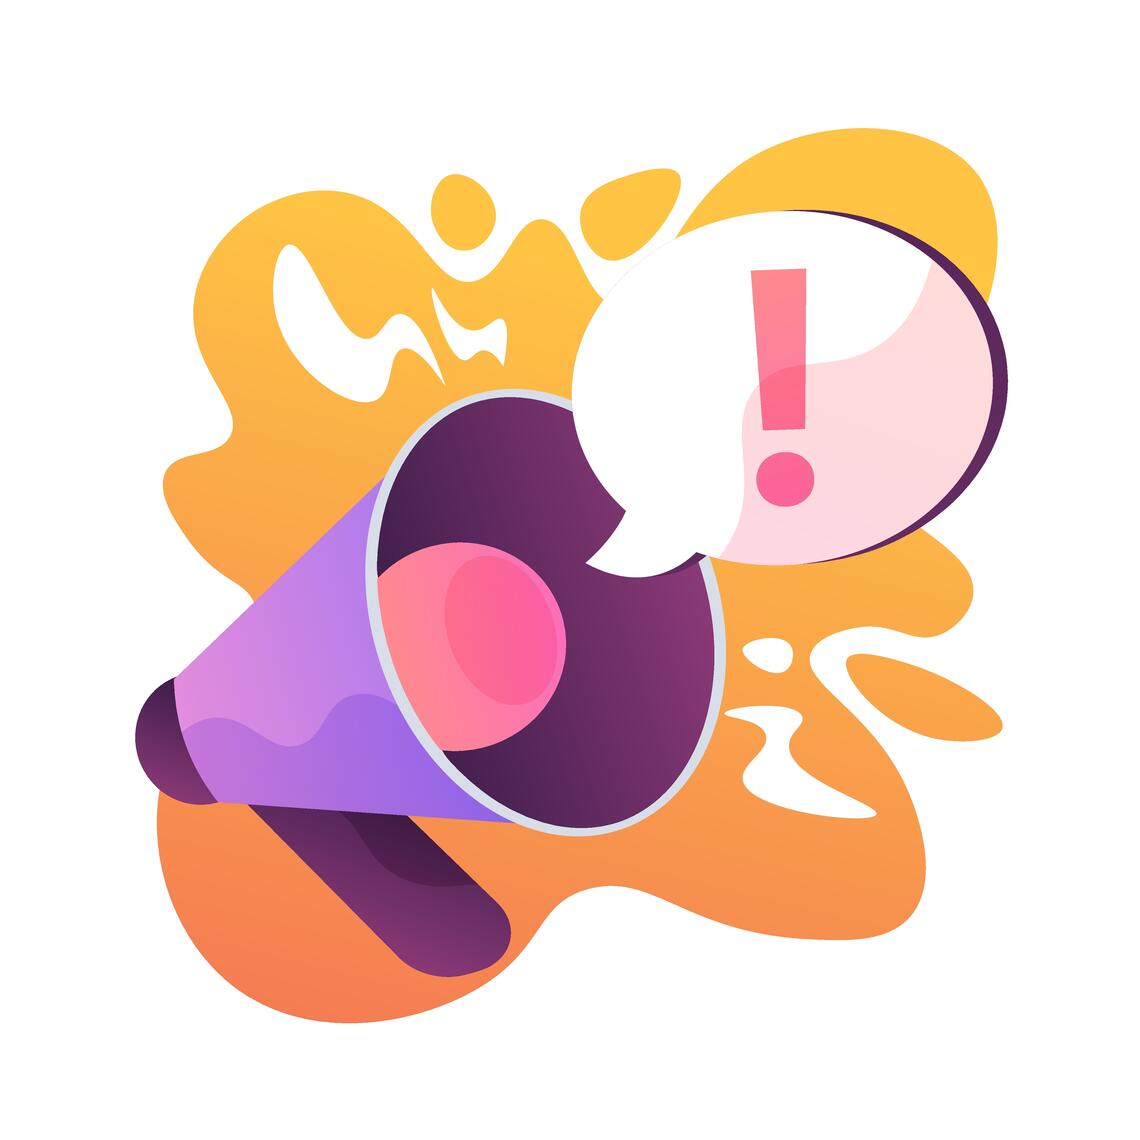 A pink and purple megaphone graphic against a yellow splash of color in the background. There is a speech bubble coming out of the megaphone with a pink exclamation point 